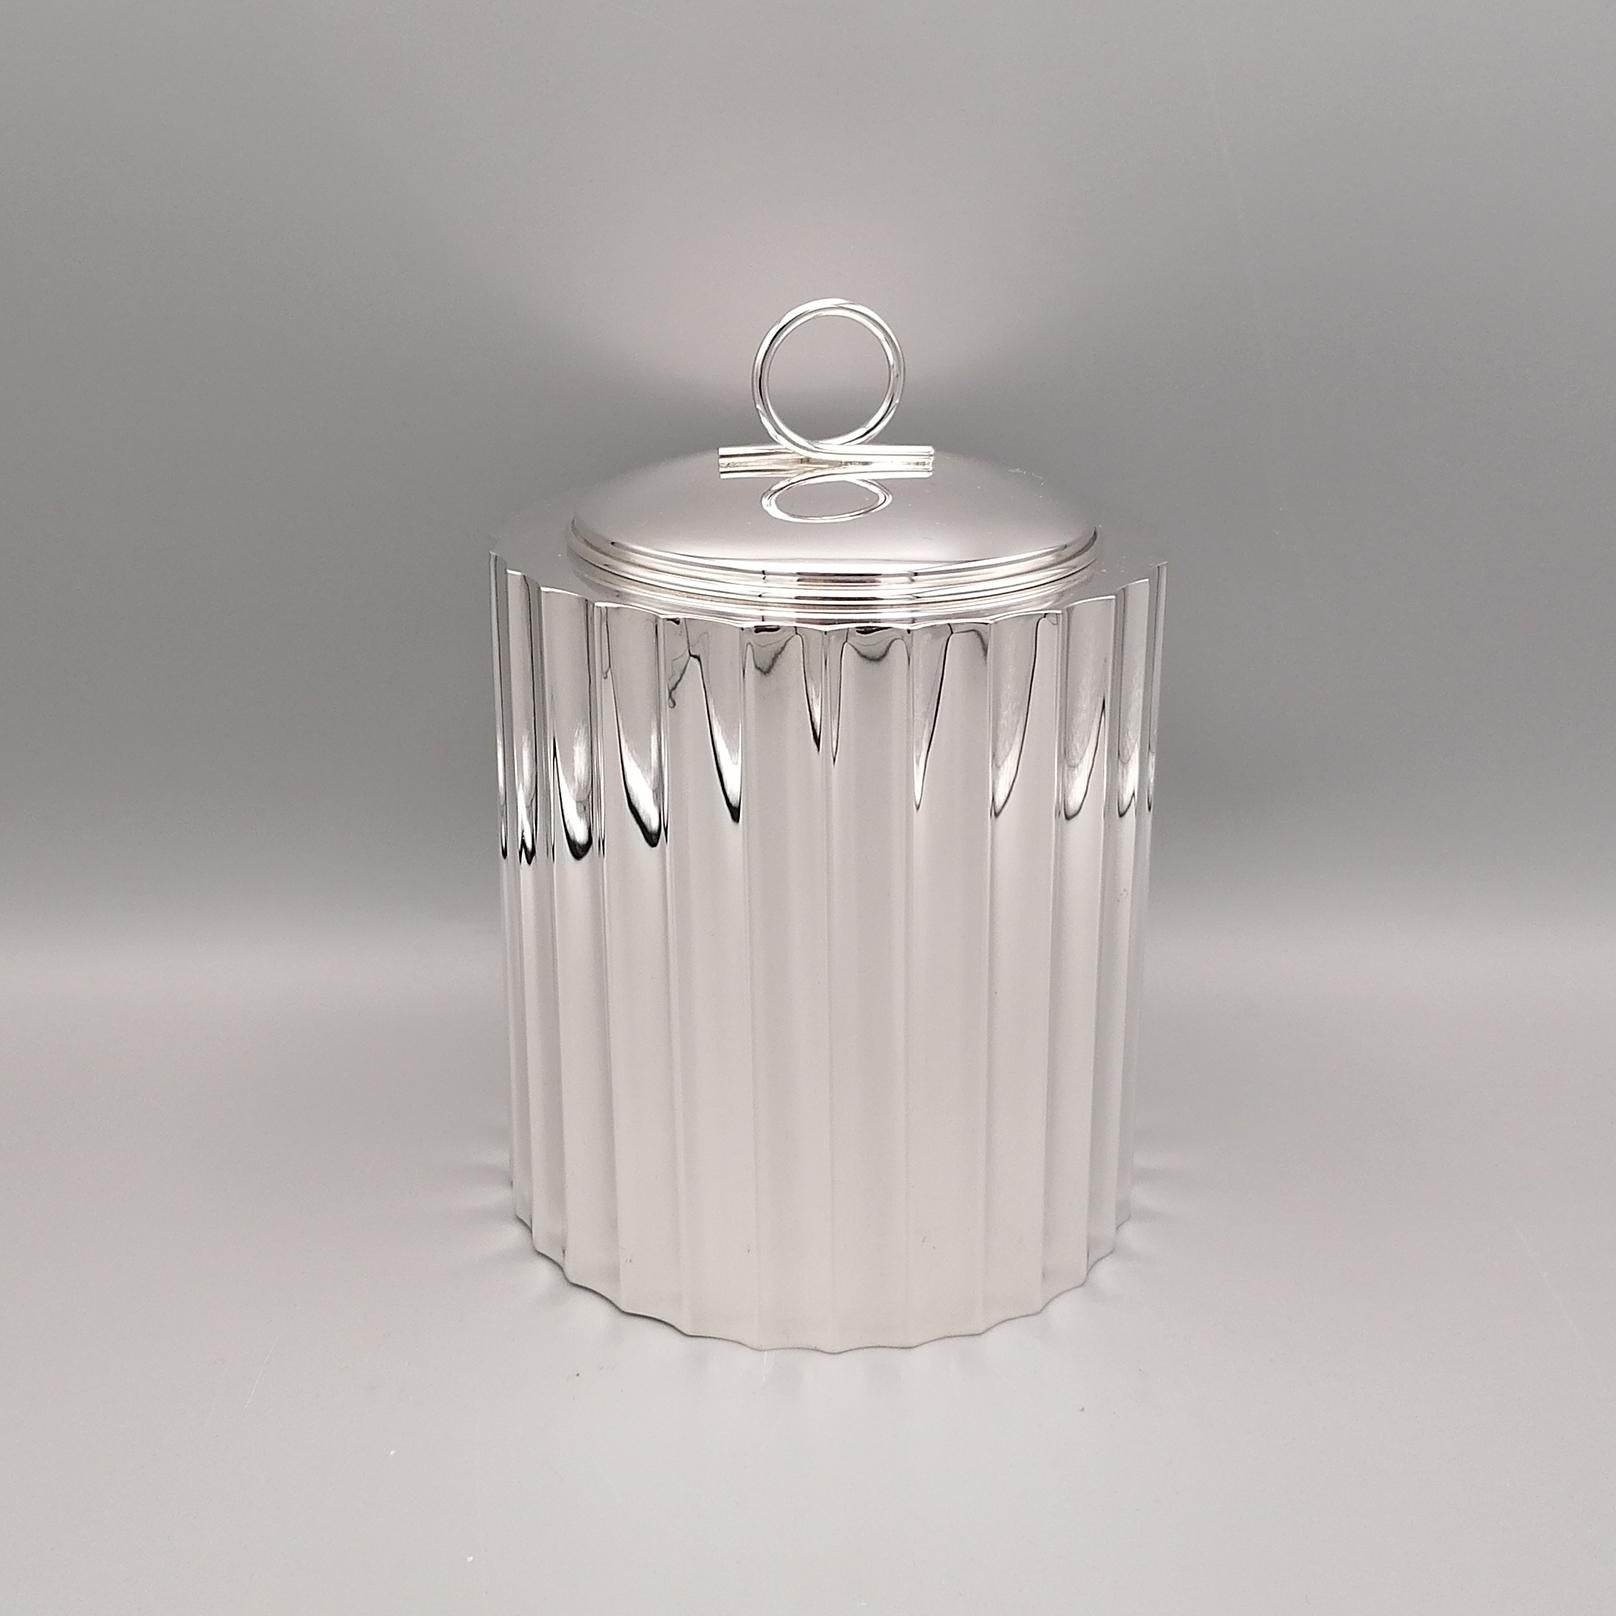 Neoclassical style cylindrical shape 925 sterling silver box.
The body of the box is fluted in the shape of a Doric column.
The lid is smooth and a simple wire welded in the center acts as a knob 
By Guglielmo Rossi silver factory - Florence -